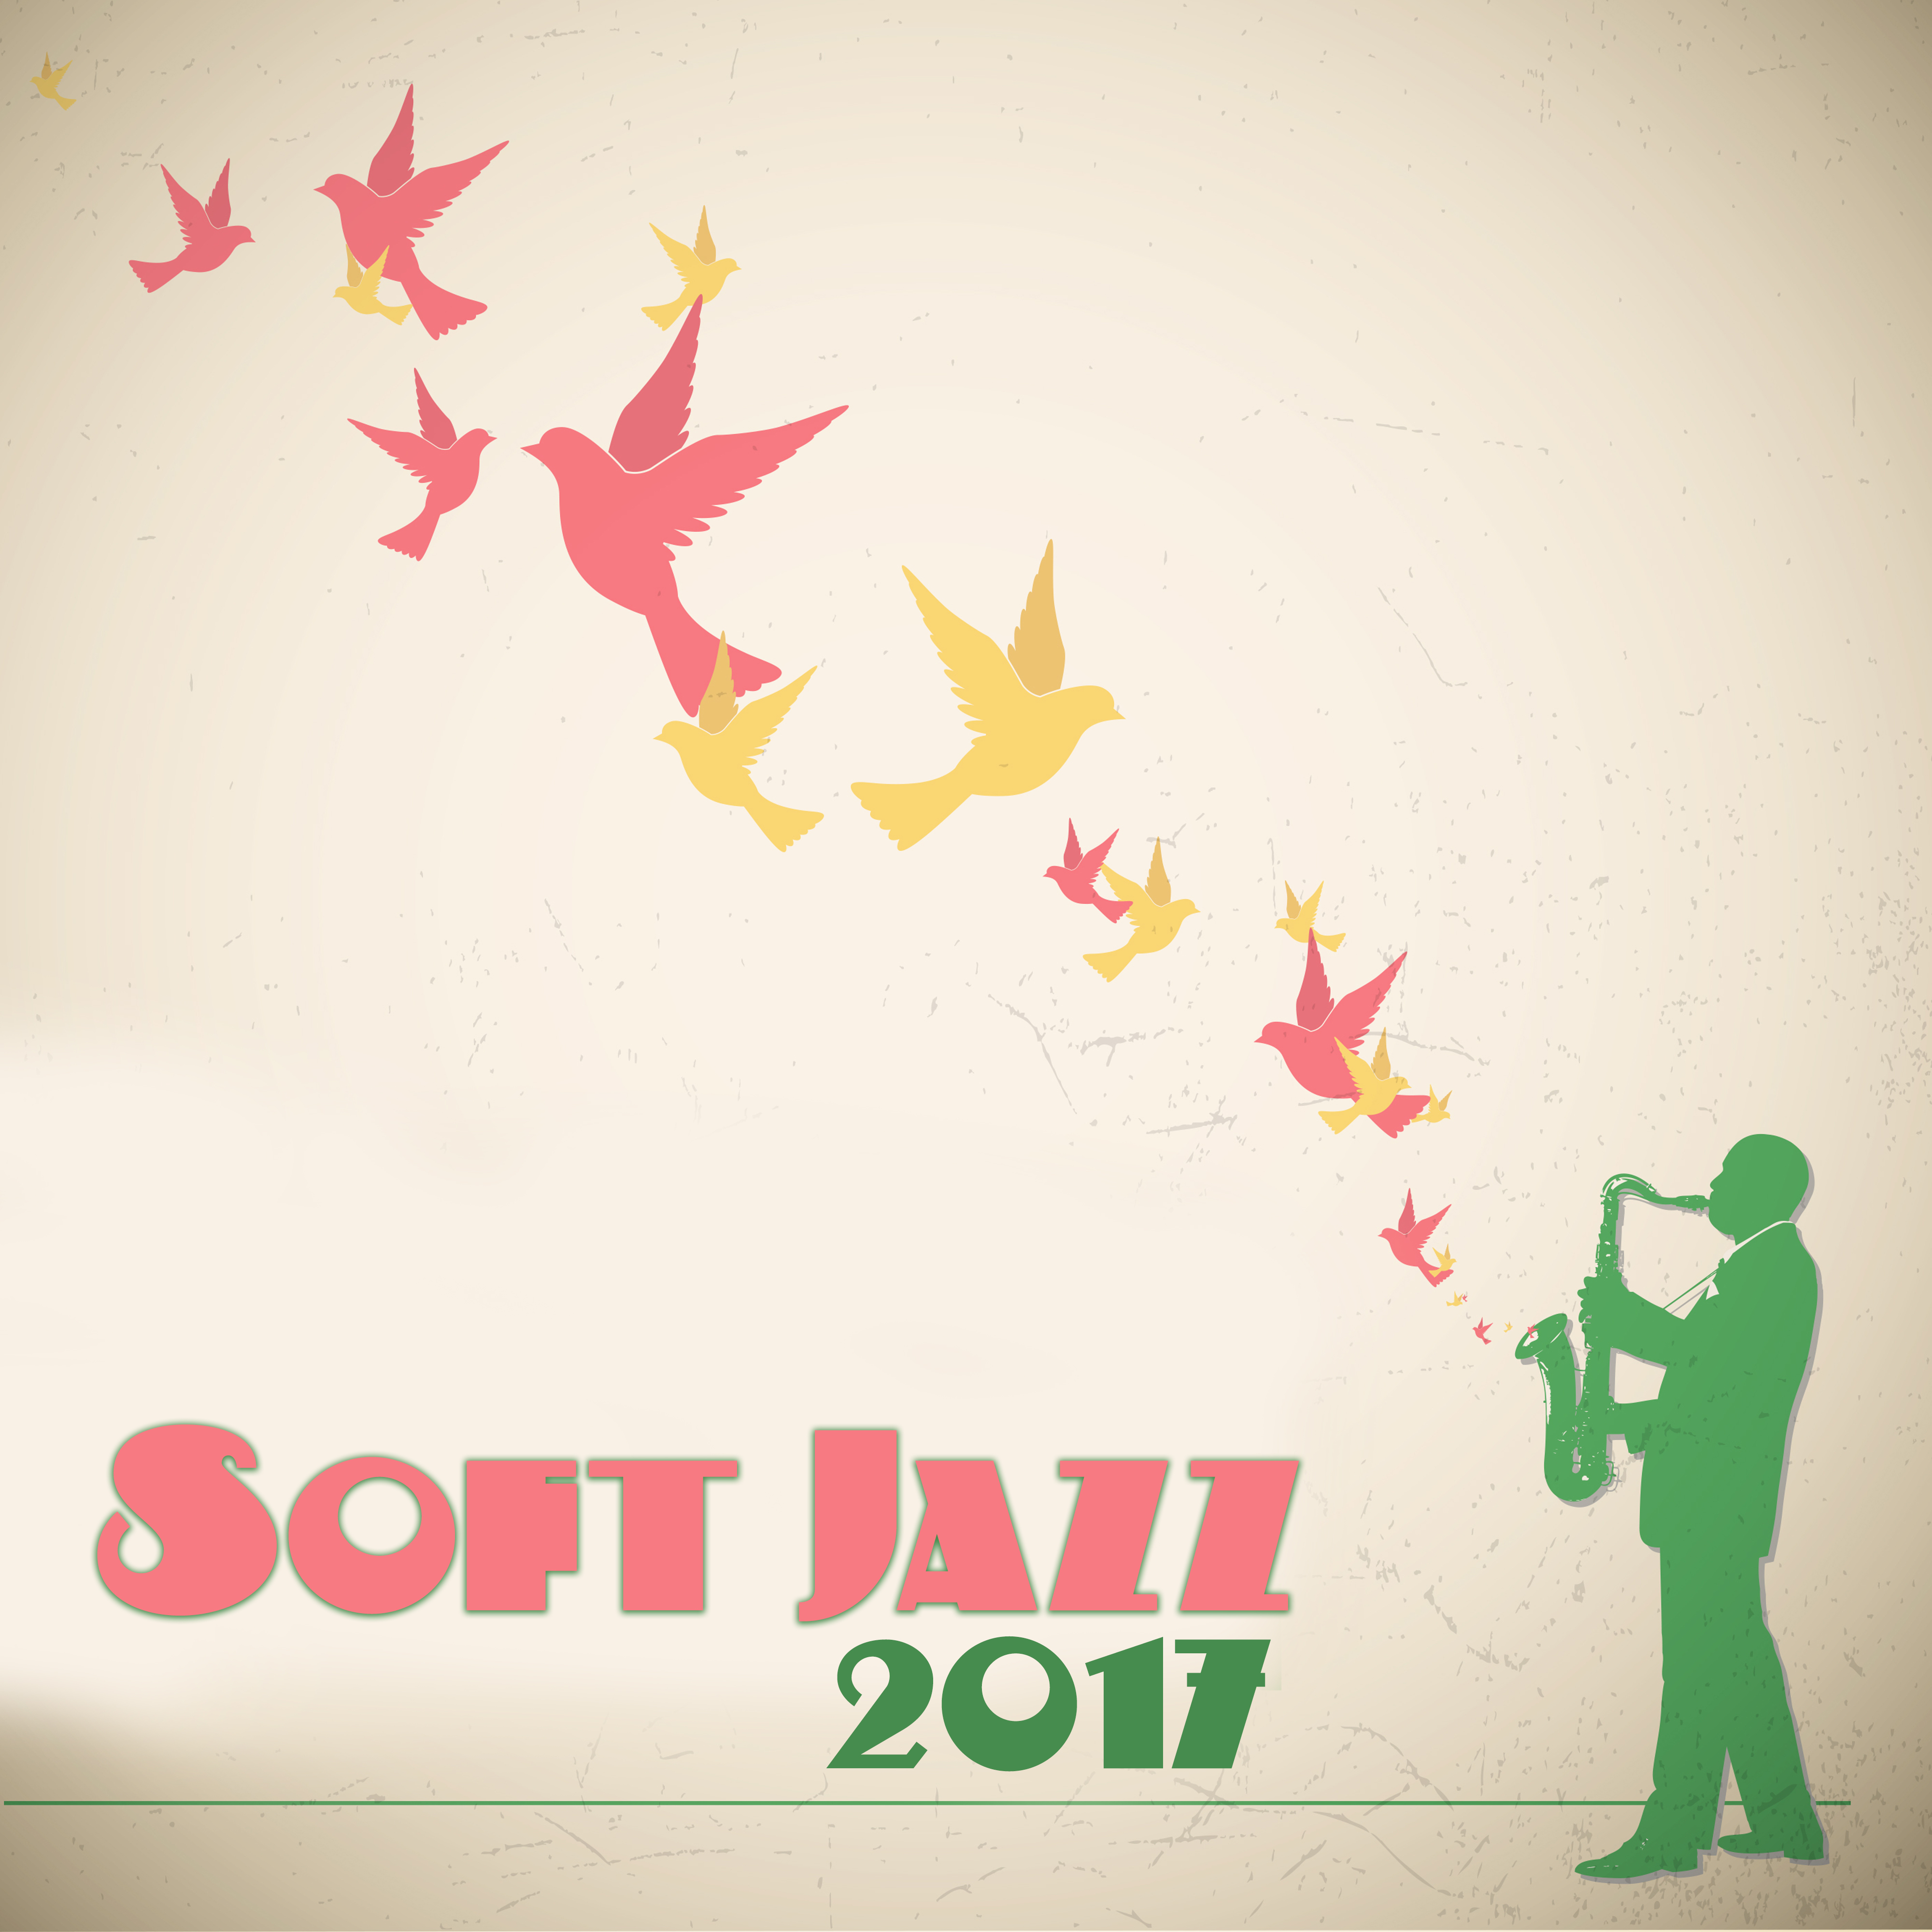 Soft Jazz 2017  Smooth Jazz Vibrations, Relaxed Lounge, Music for Rest Time, Soothing Jazz Compilation